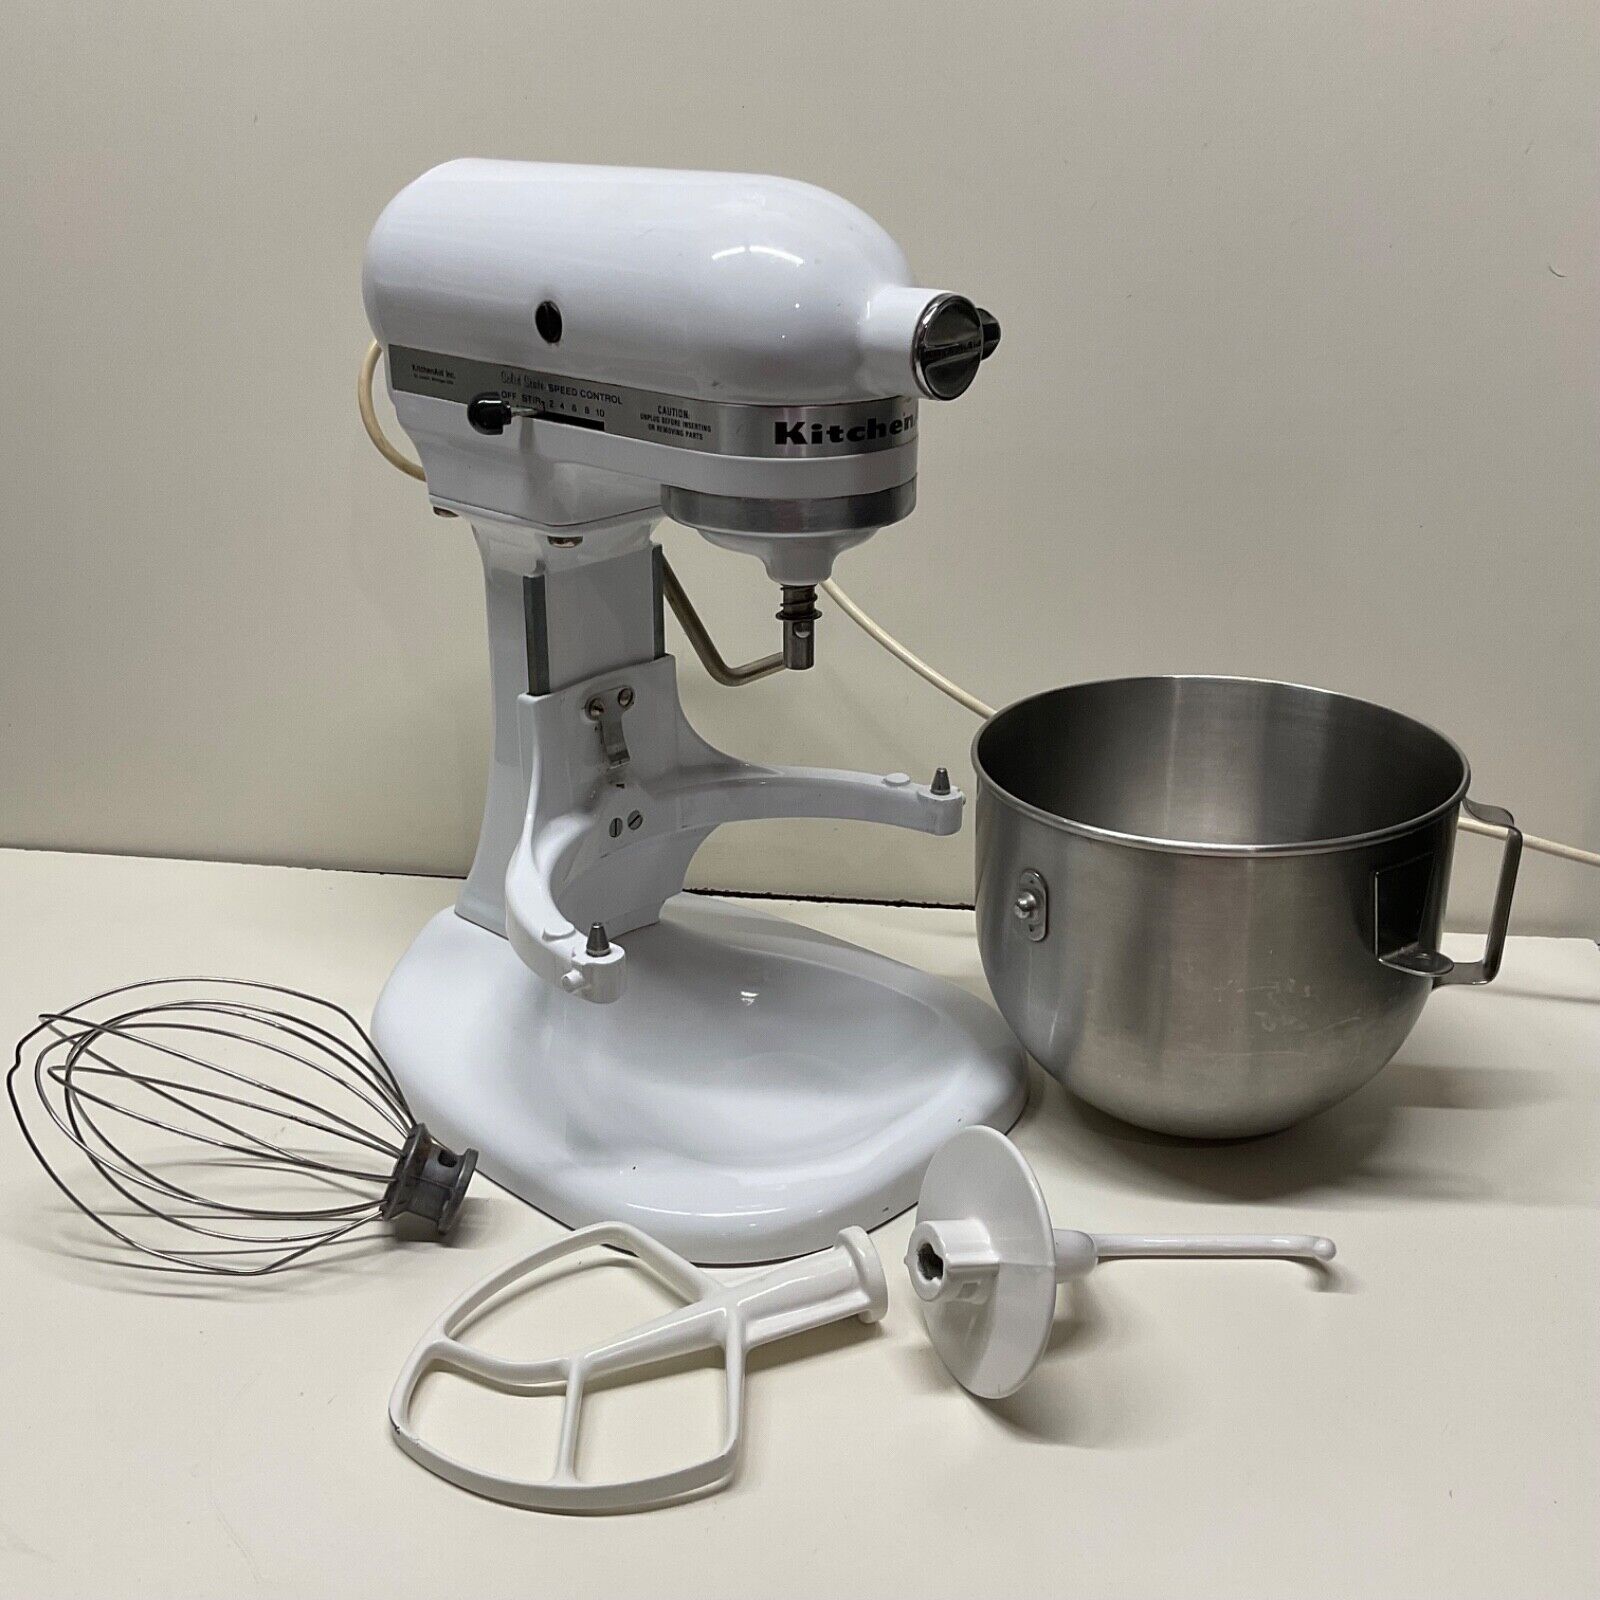 This One Adjustment to Your KitchenAid Will Make it Run Better